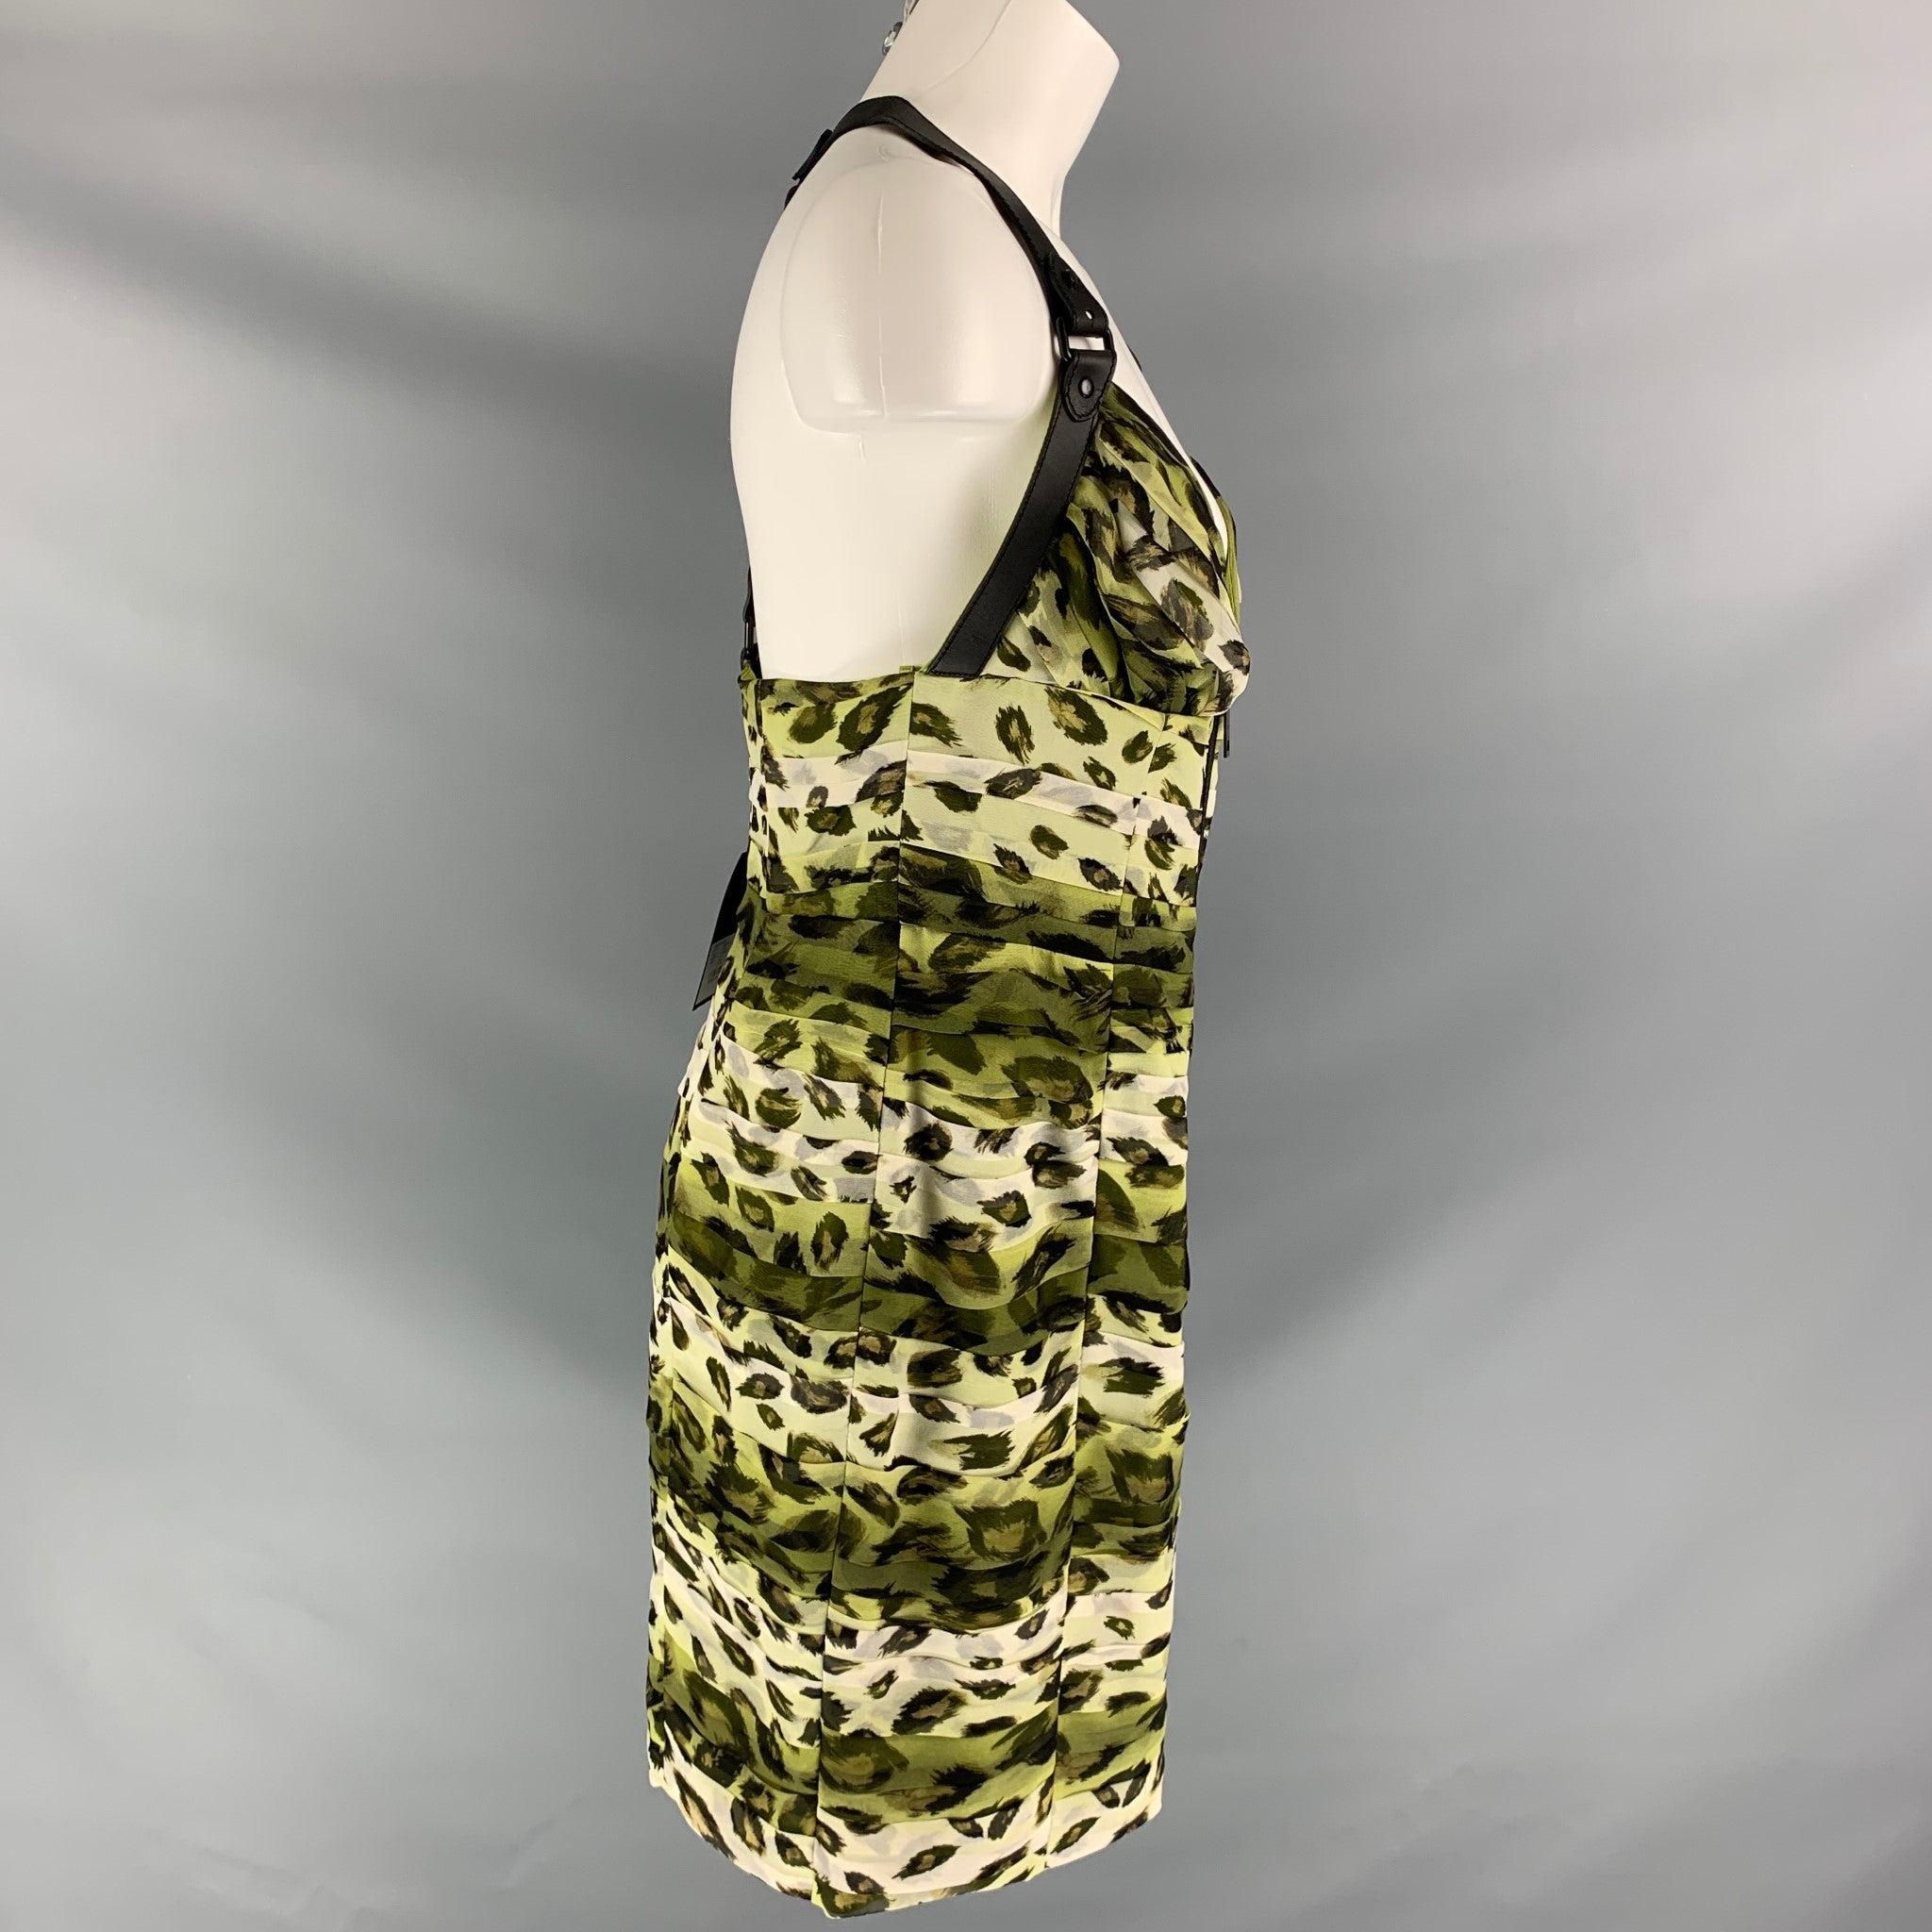 BURBERRY PRORSUM Spring 2011 Size 10 Silk Camouflage Leather Knee-Length Dress In Good Condition For Sale In San Francisco, CA